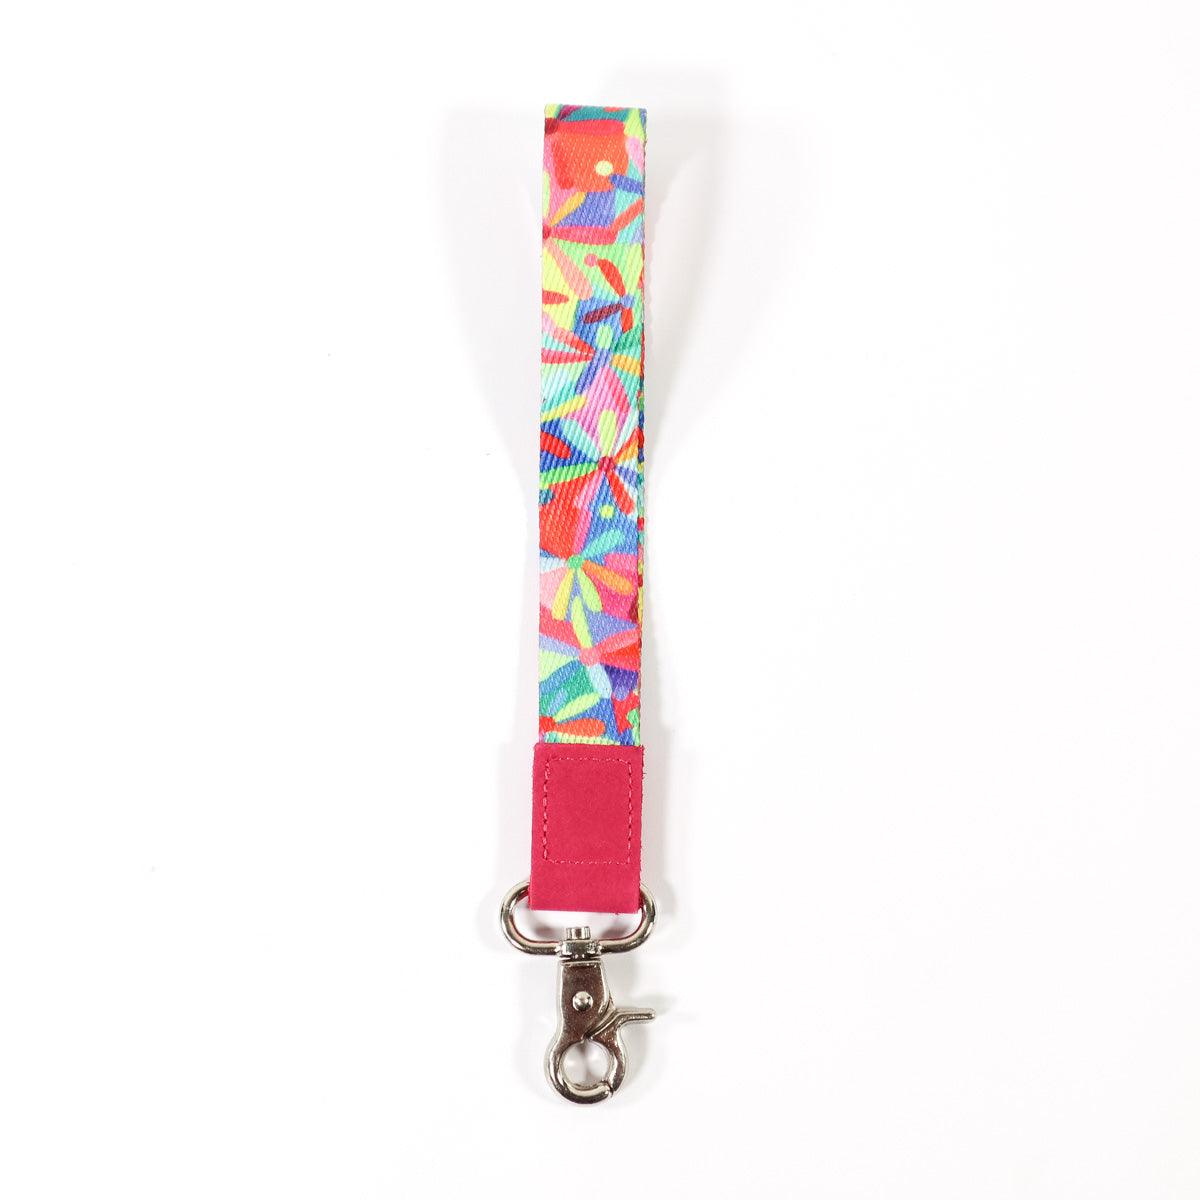 Load image into Gallery viewer, RAINBOW DAISIES Wrist Lanyard -Ruby Olive X Mrs Edgard X Lordy Dordie COLLAB - Lordy Dordie Art
